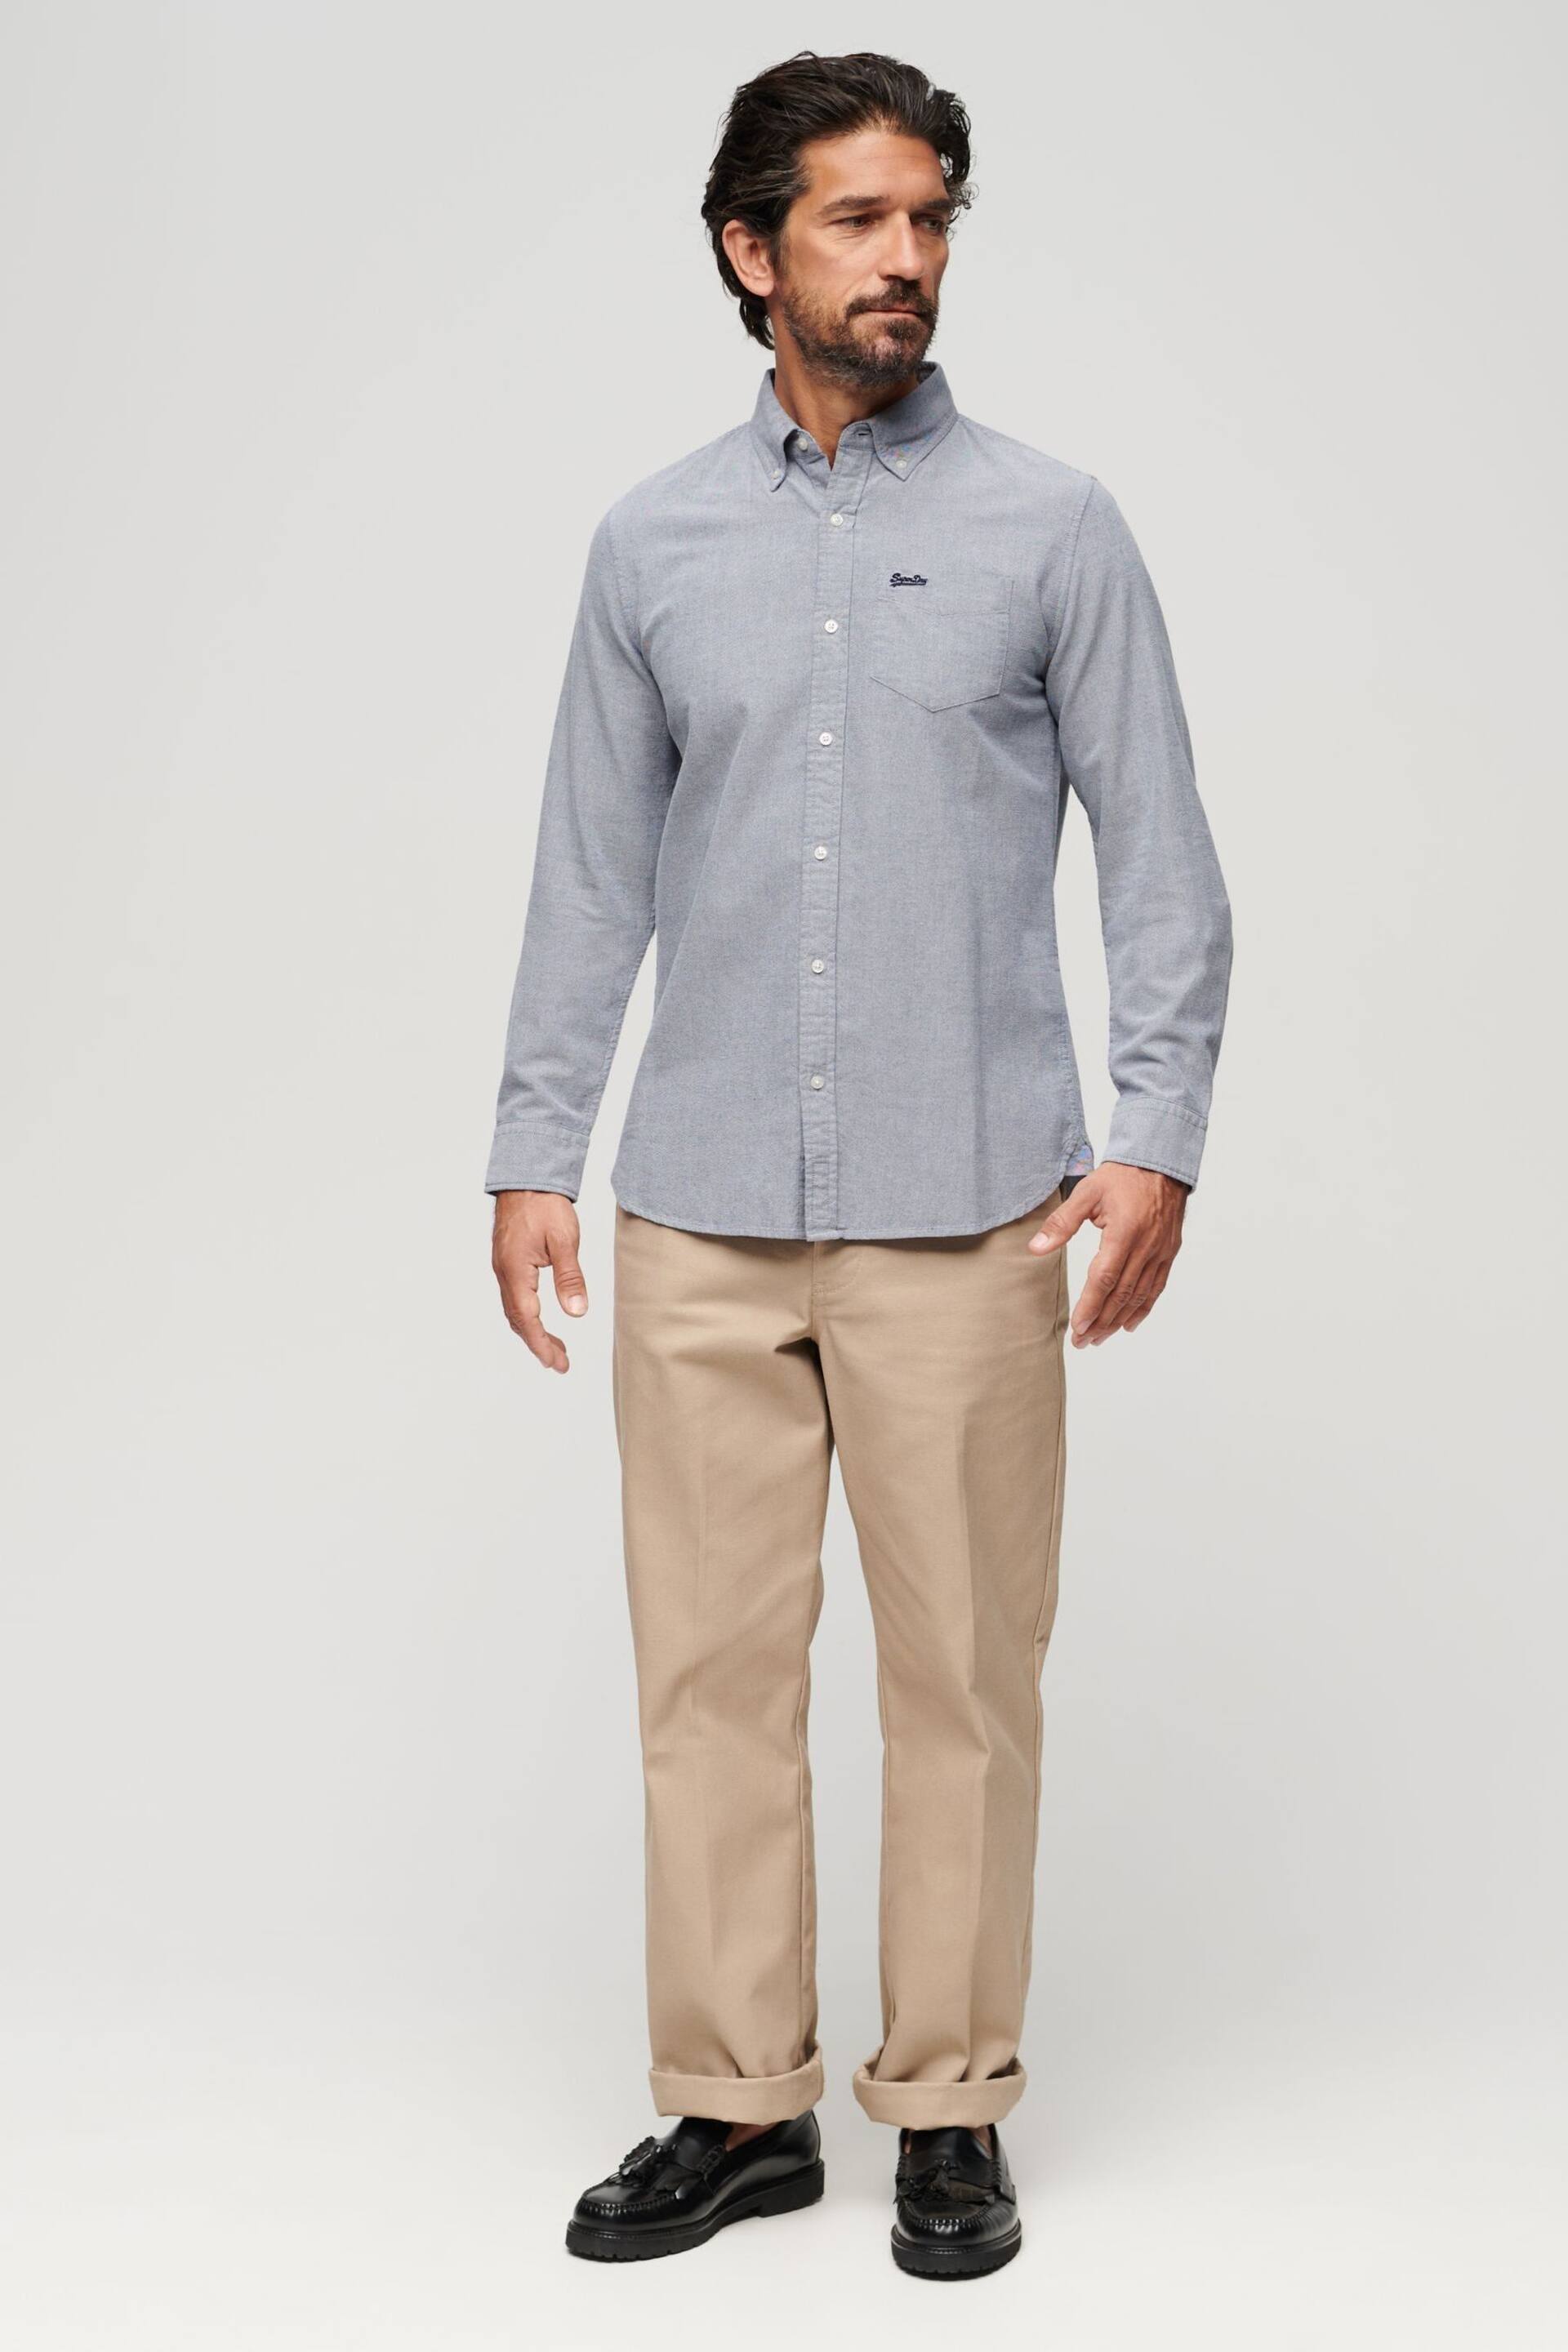 Superdry Blue Cotton Long Sleeved Oxford Shirt - Image 3 of 6